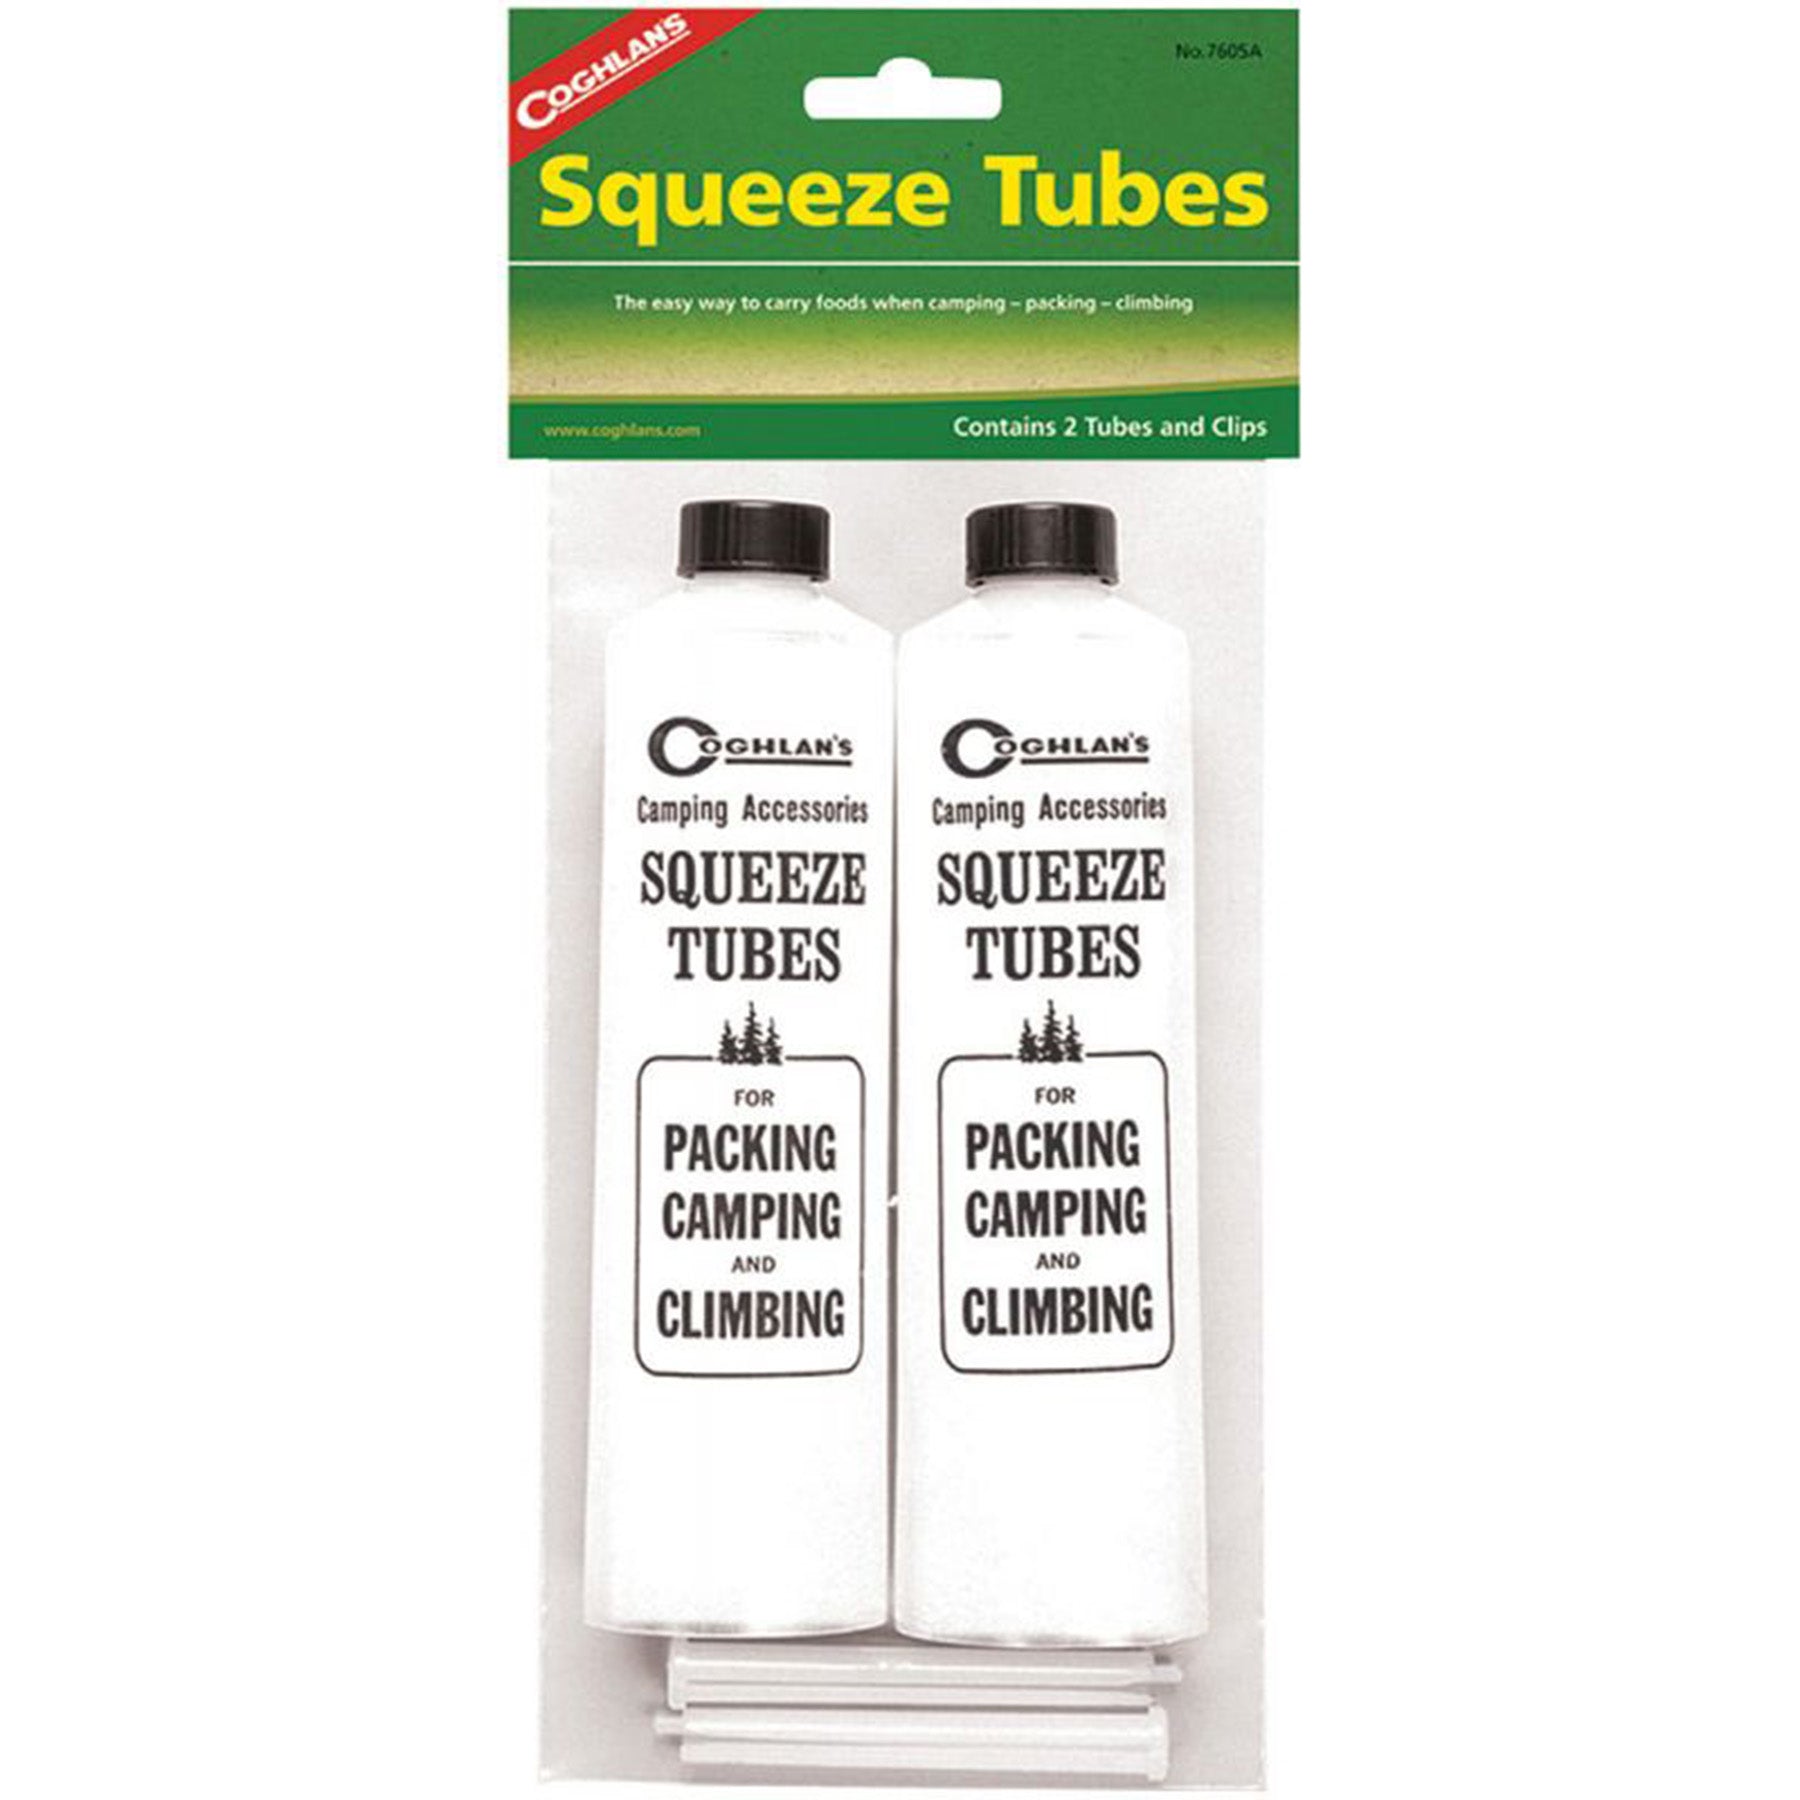 two squeeze tubes pictured in their packaging